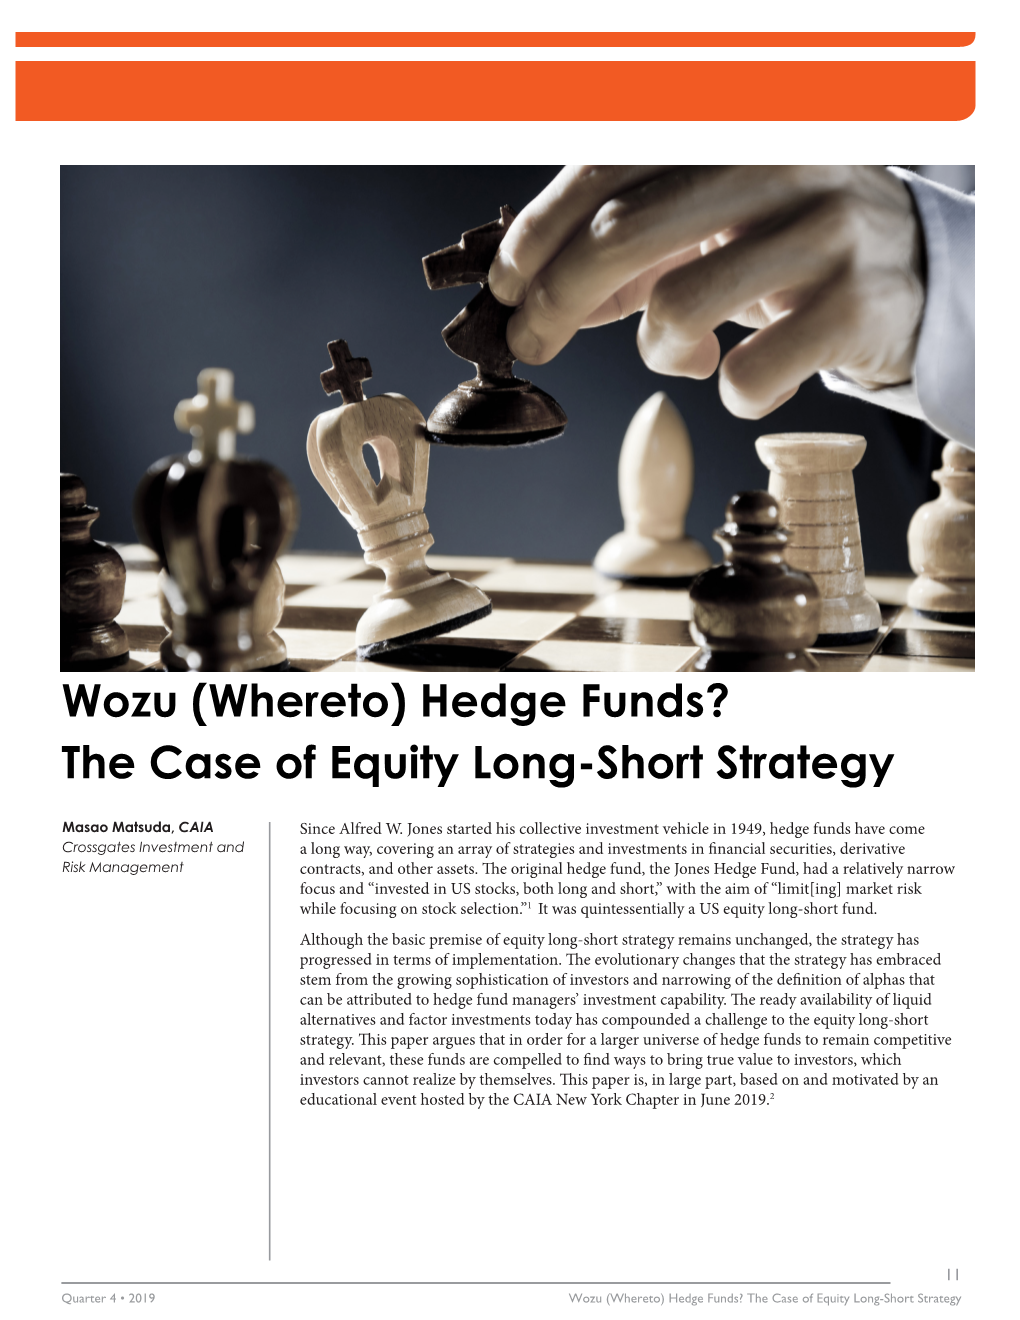 Wozu (Whereto) Hedge Funds? the Case of Equity Long-Short Strategy